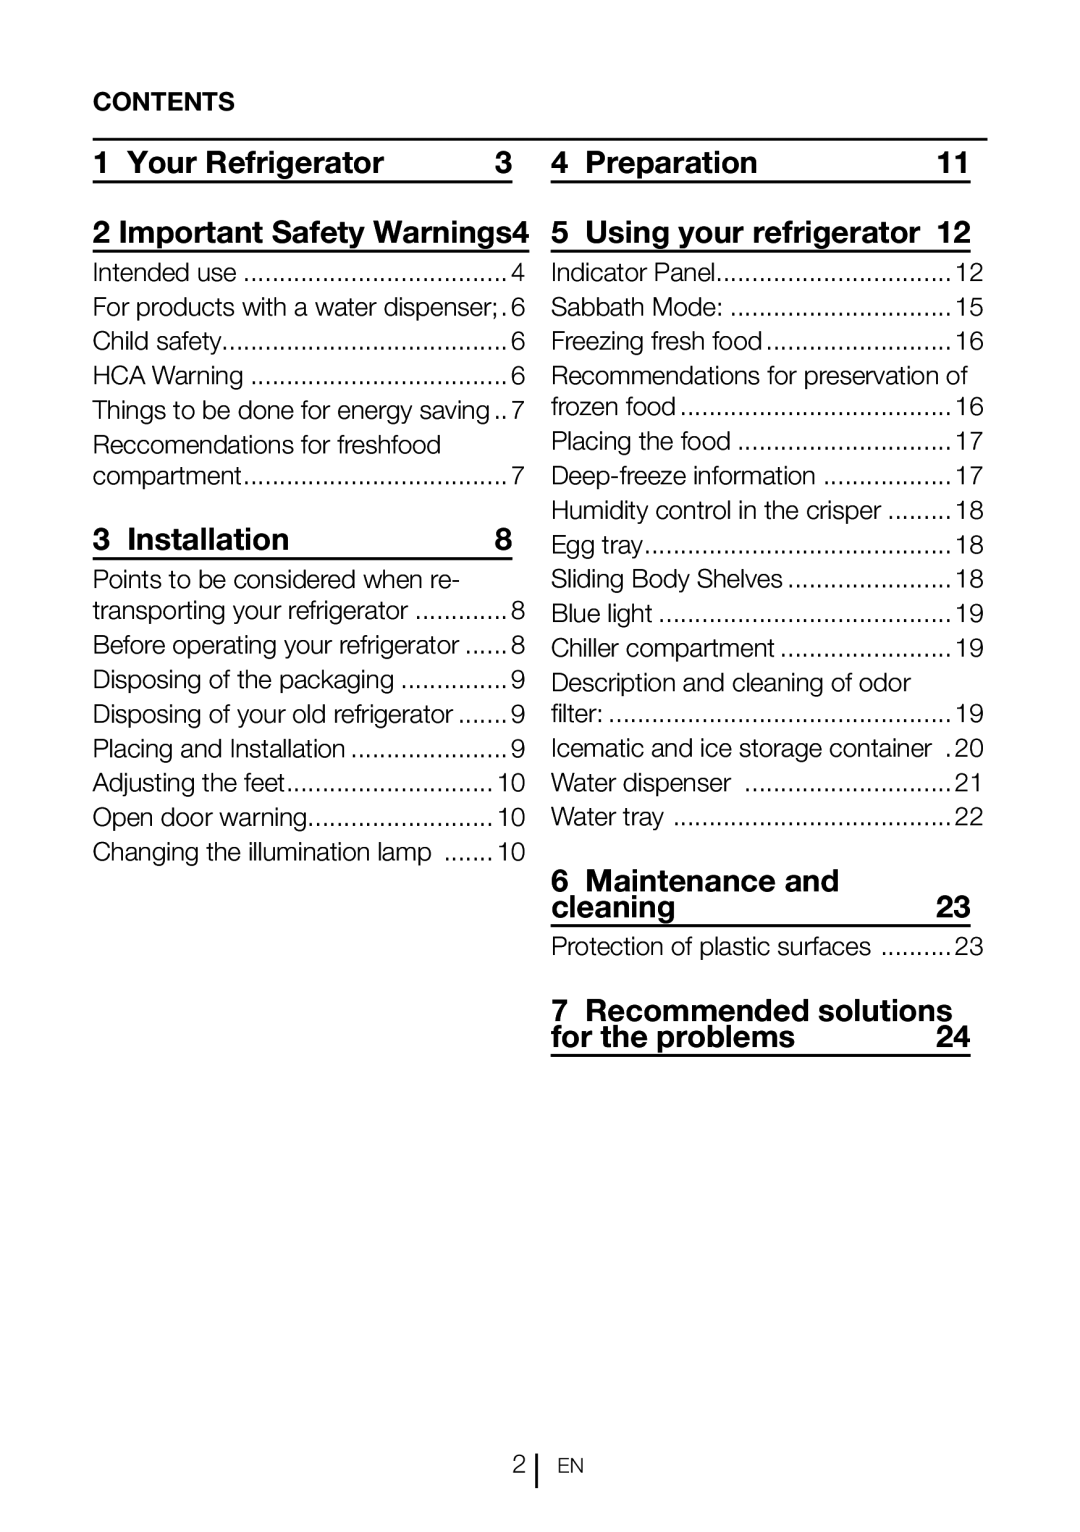 Blomberg DND 1976 XT Your Refrigerator, 3 4 Preparation, Important Safety Warnings4, Installation, Using your refrigerator 